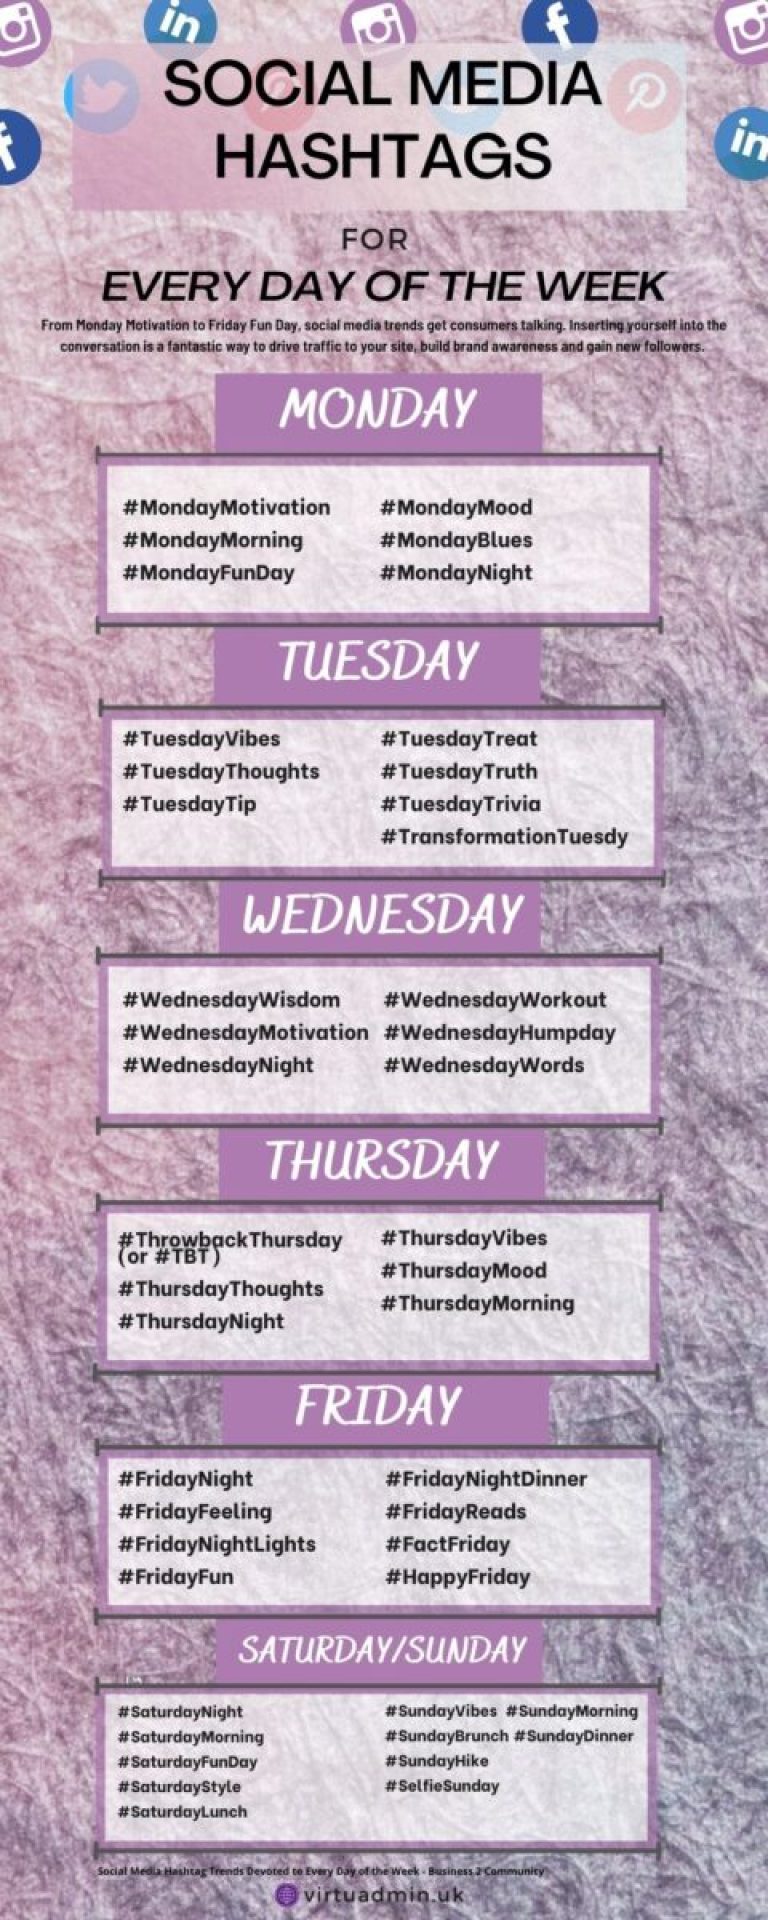 Social media hashtags for every day of the week infographic